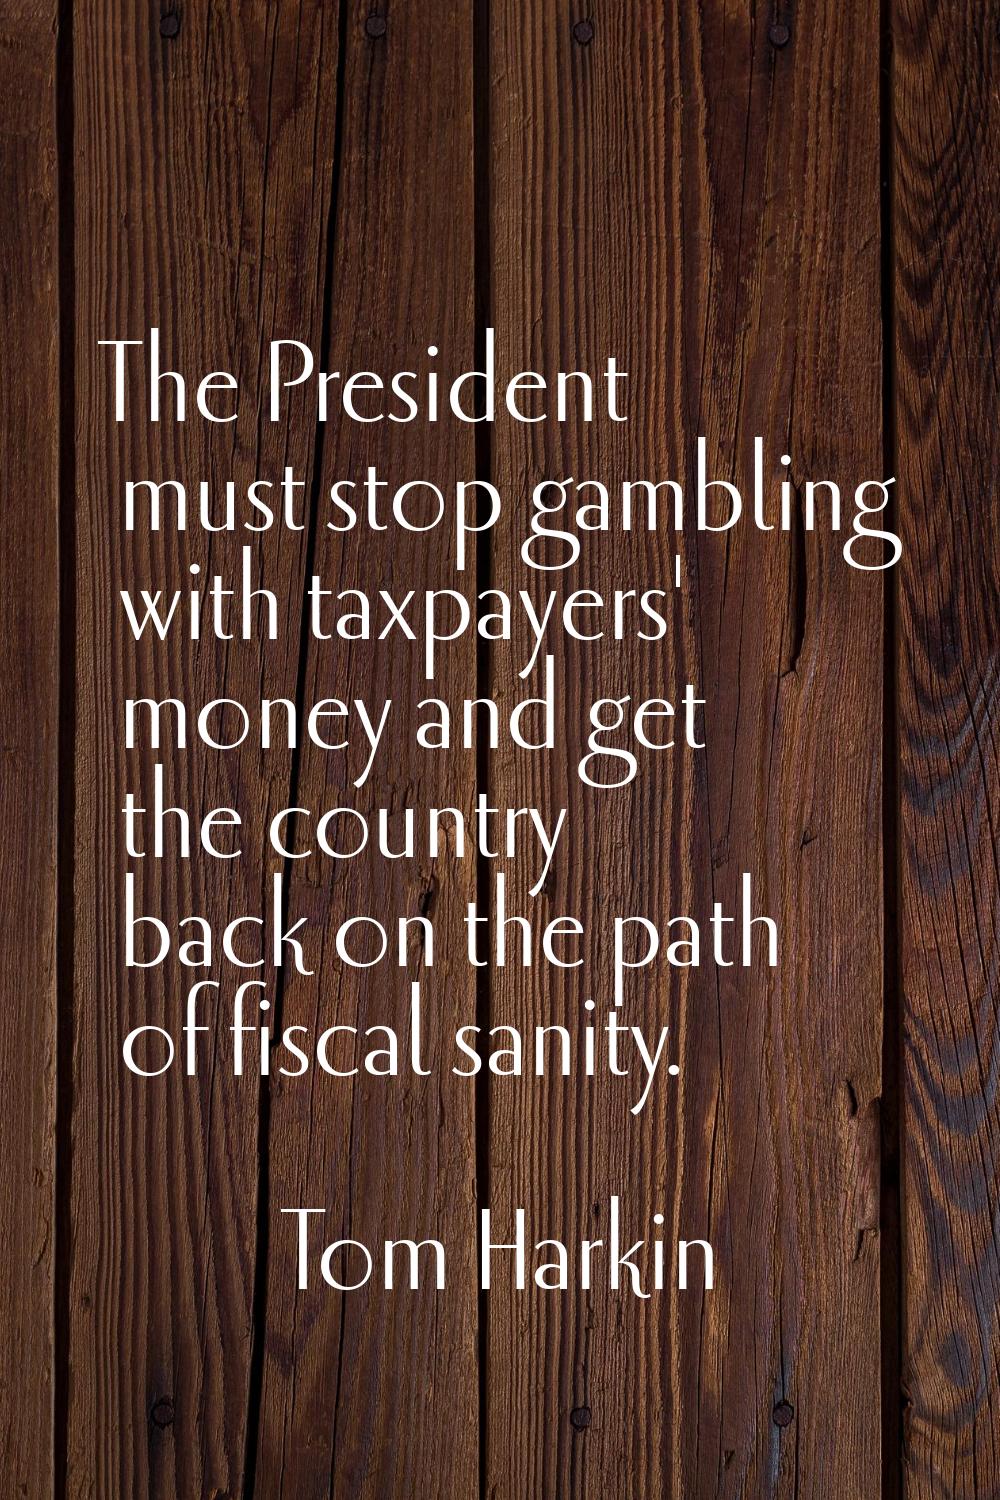 The President must stop gambling with taxpayers' money and get the country back on the path of fisc